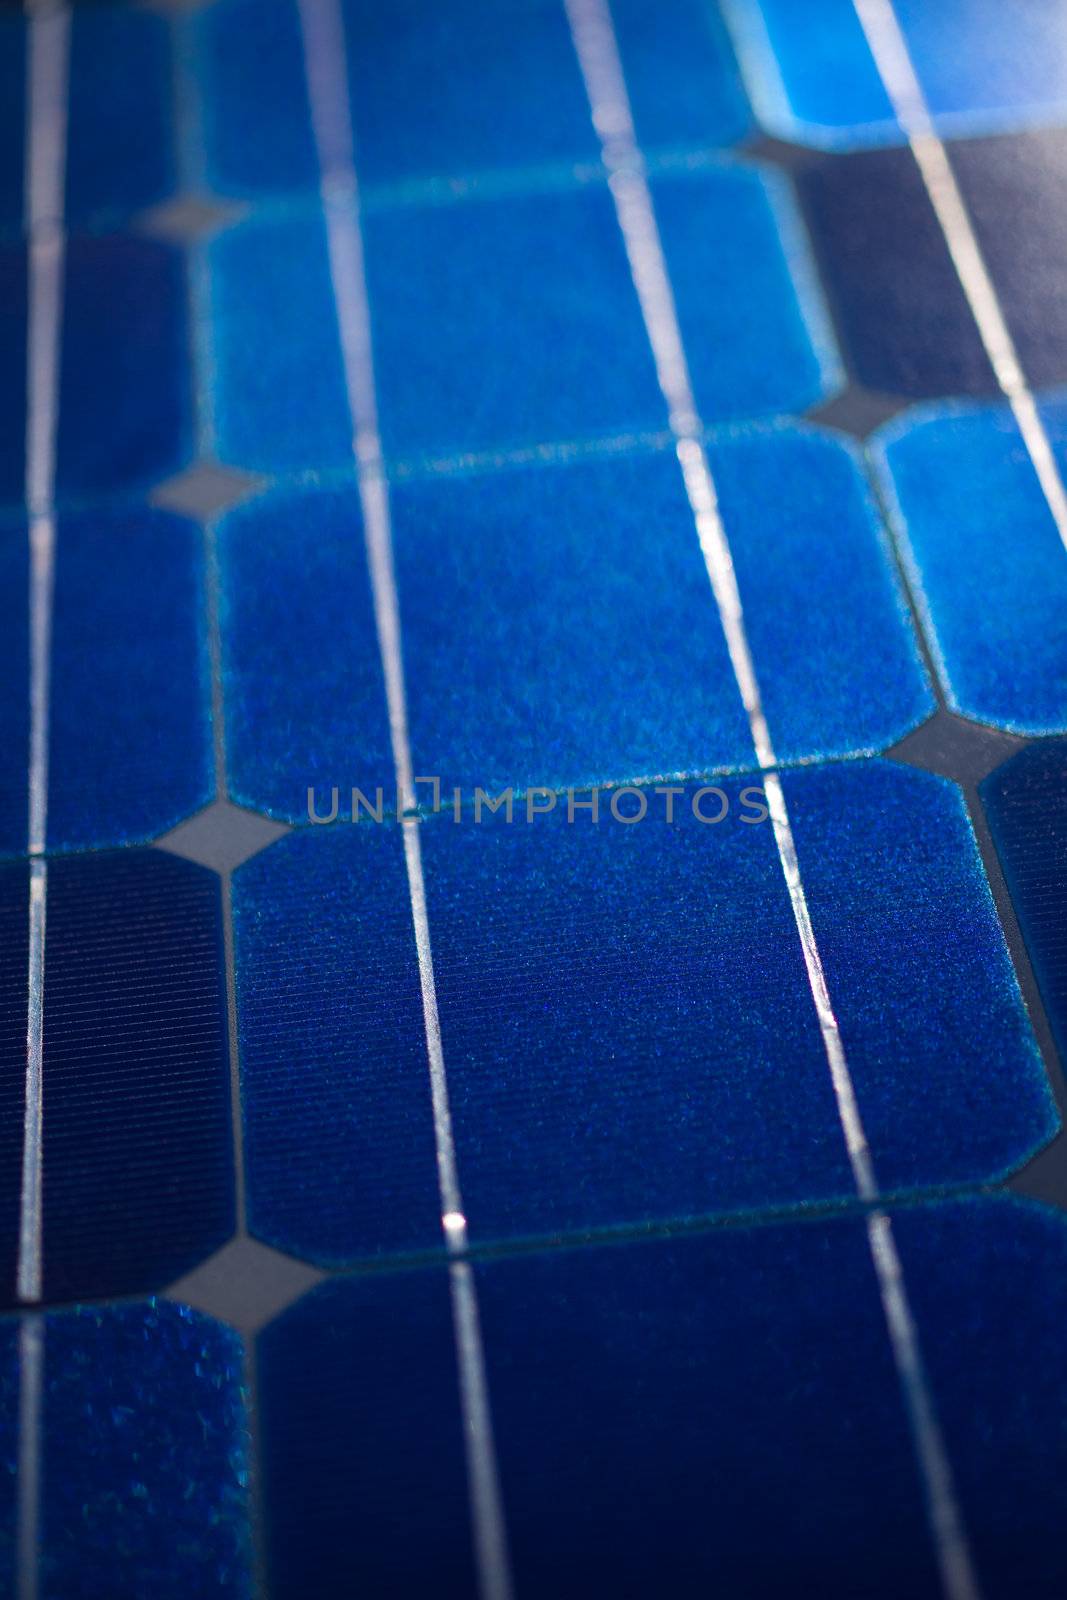 Pattern of solar cell wafers in photovoltaic solar panel with shallow DOF.